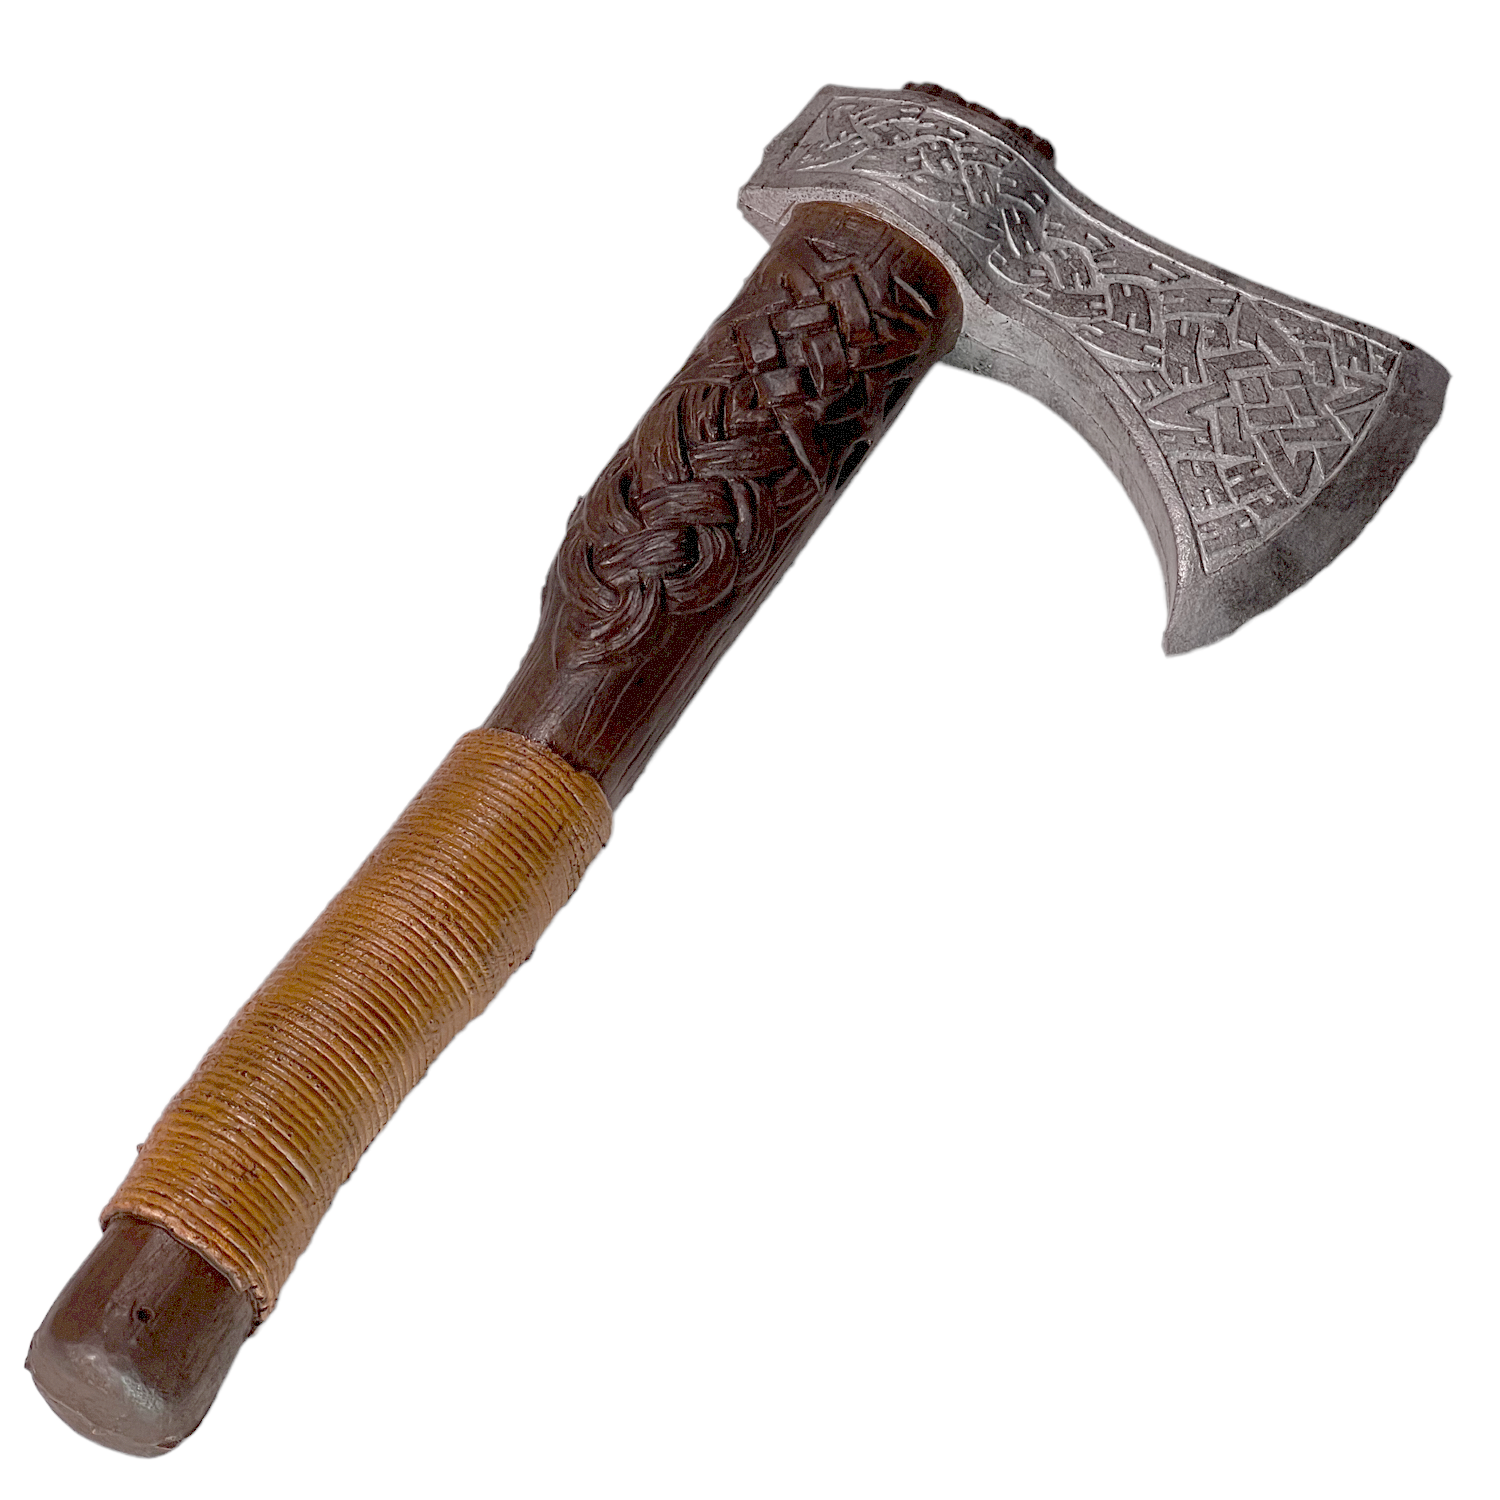 Foam Rubber Throwing Hand Axe - Celtic Norse Viking Style - New - New